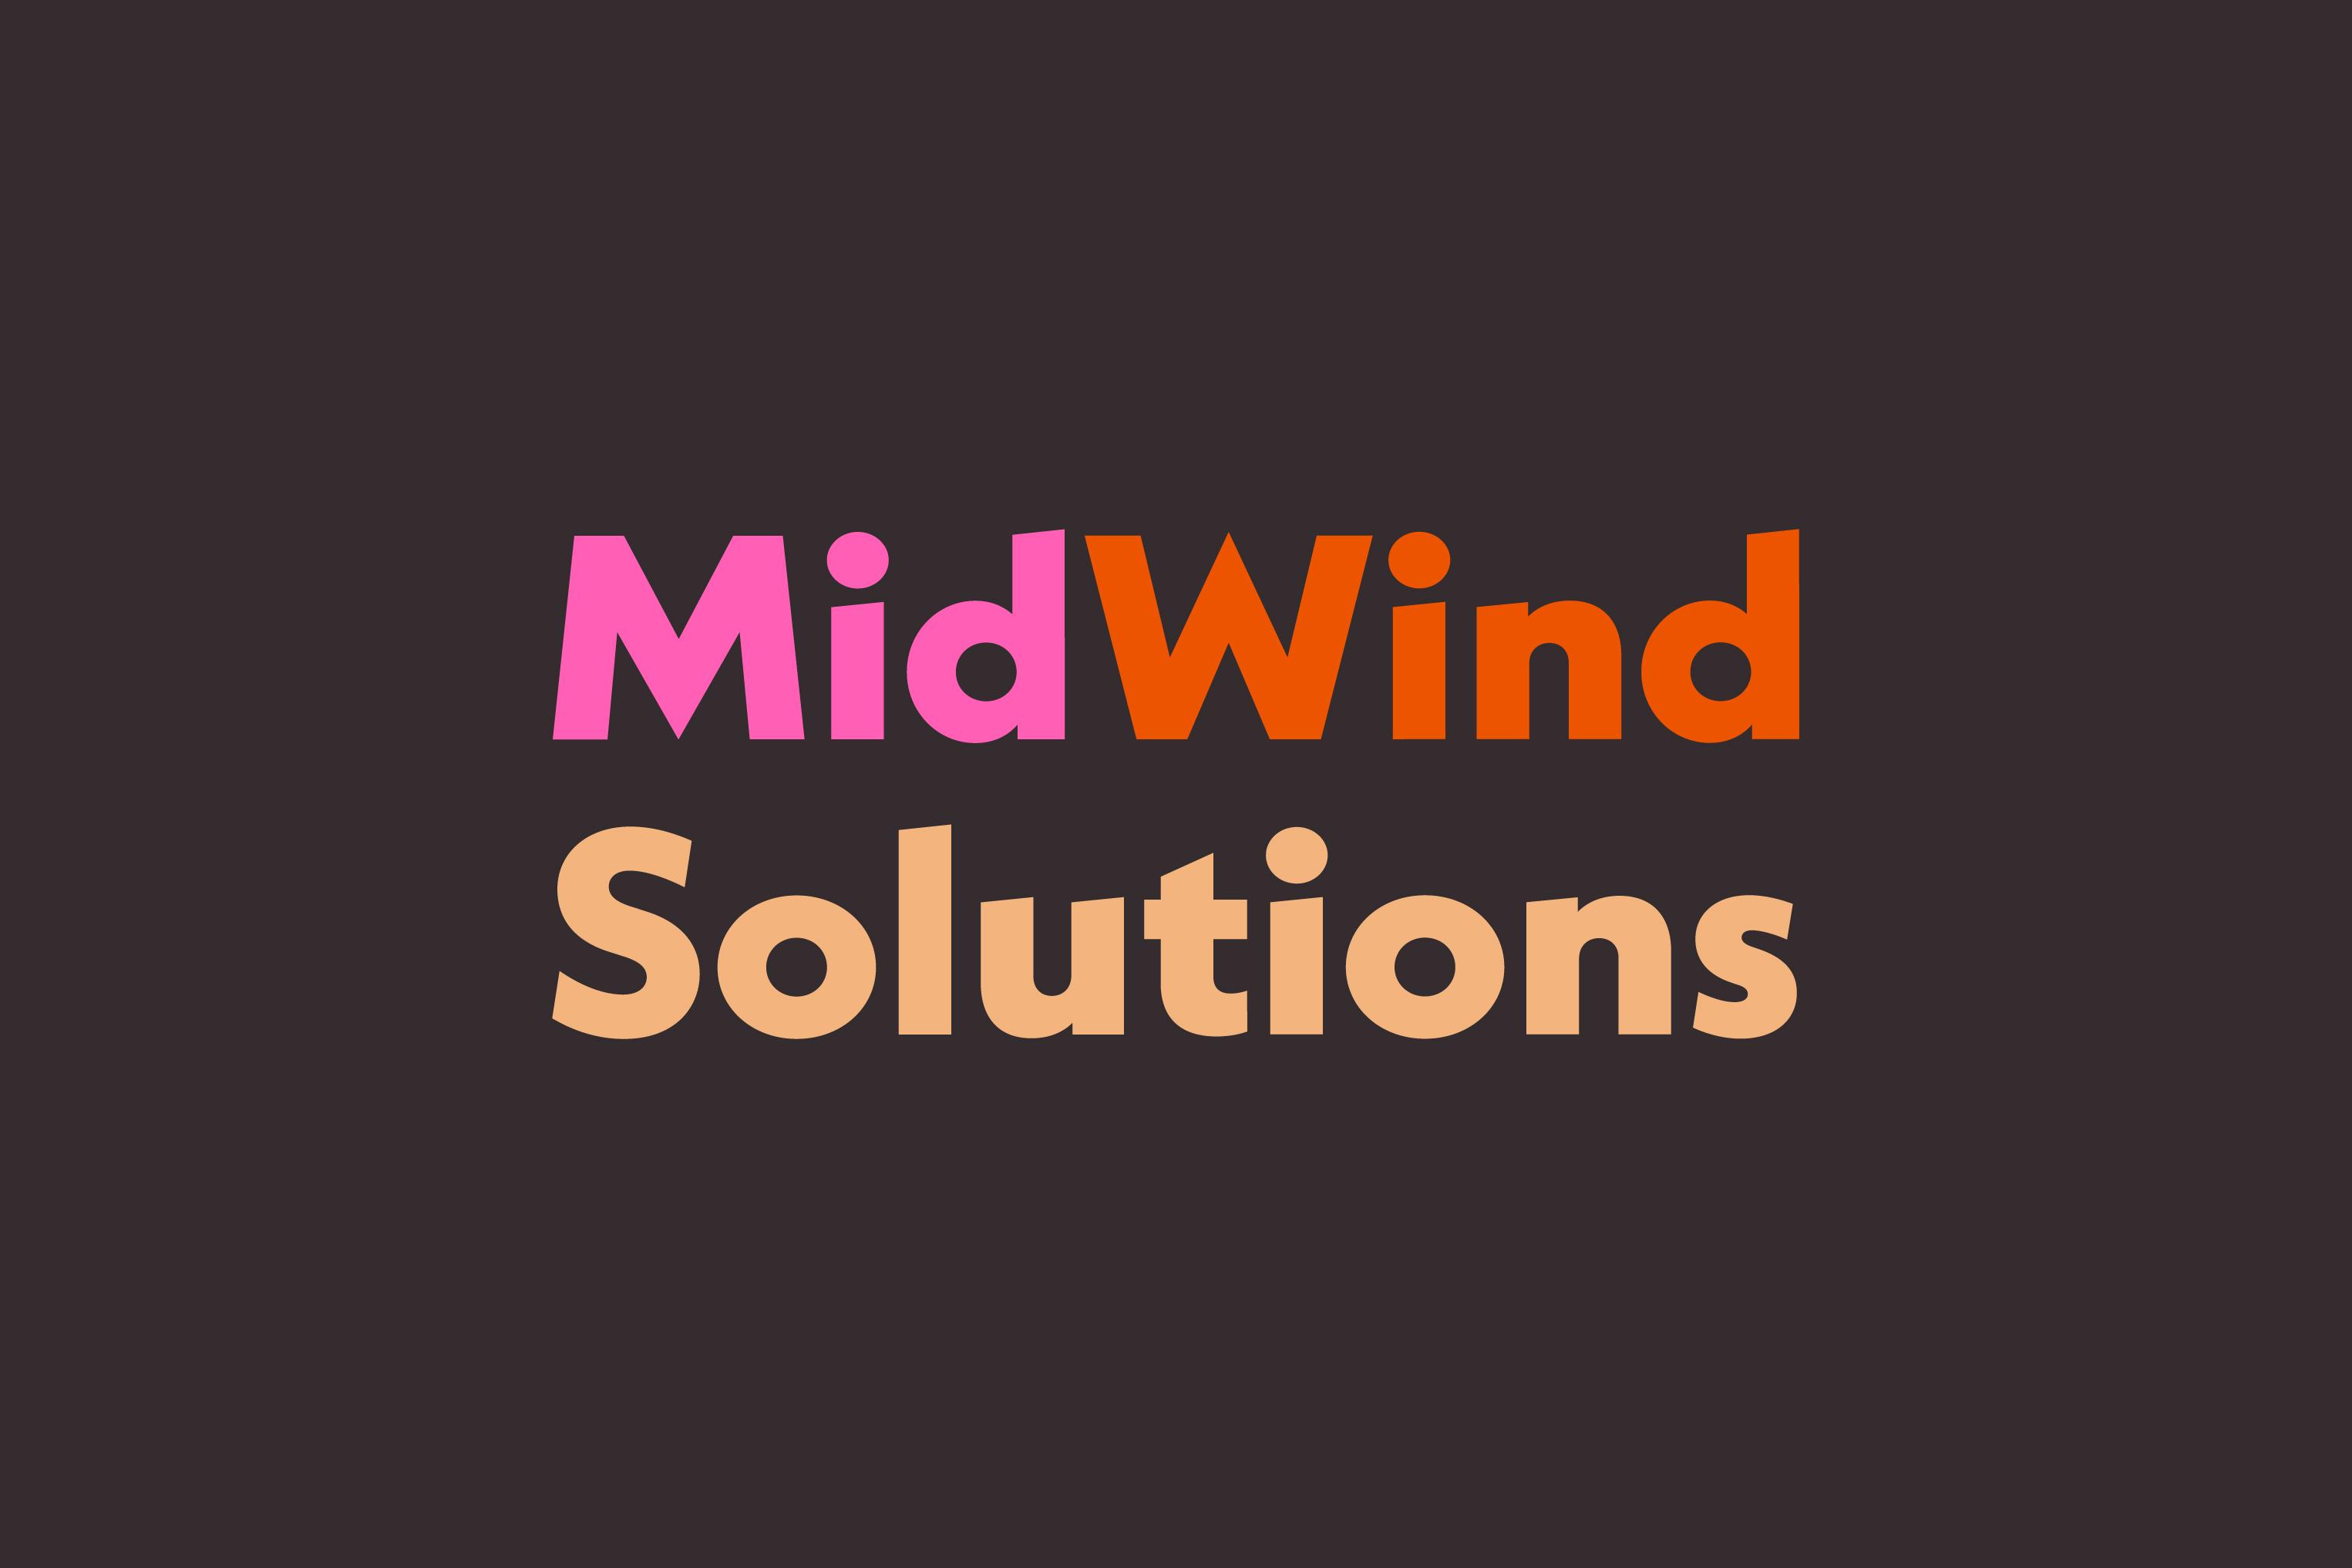 MidWind Solutions